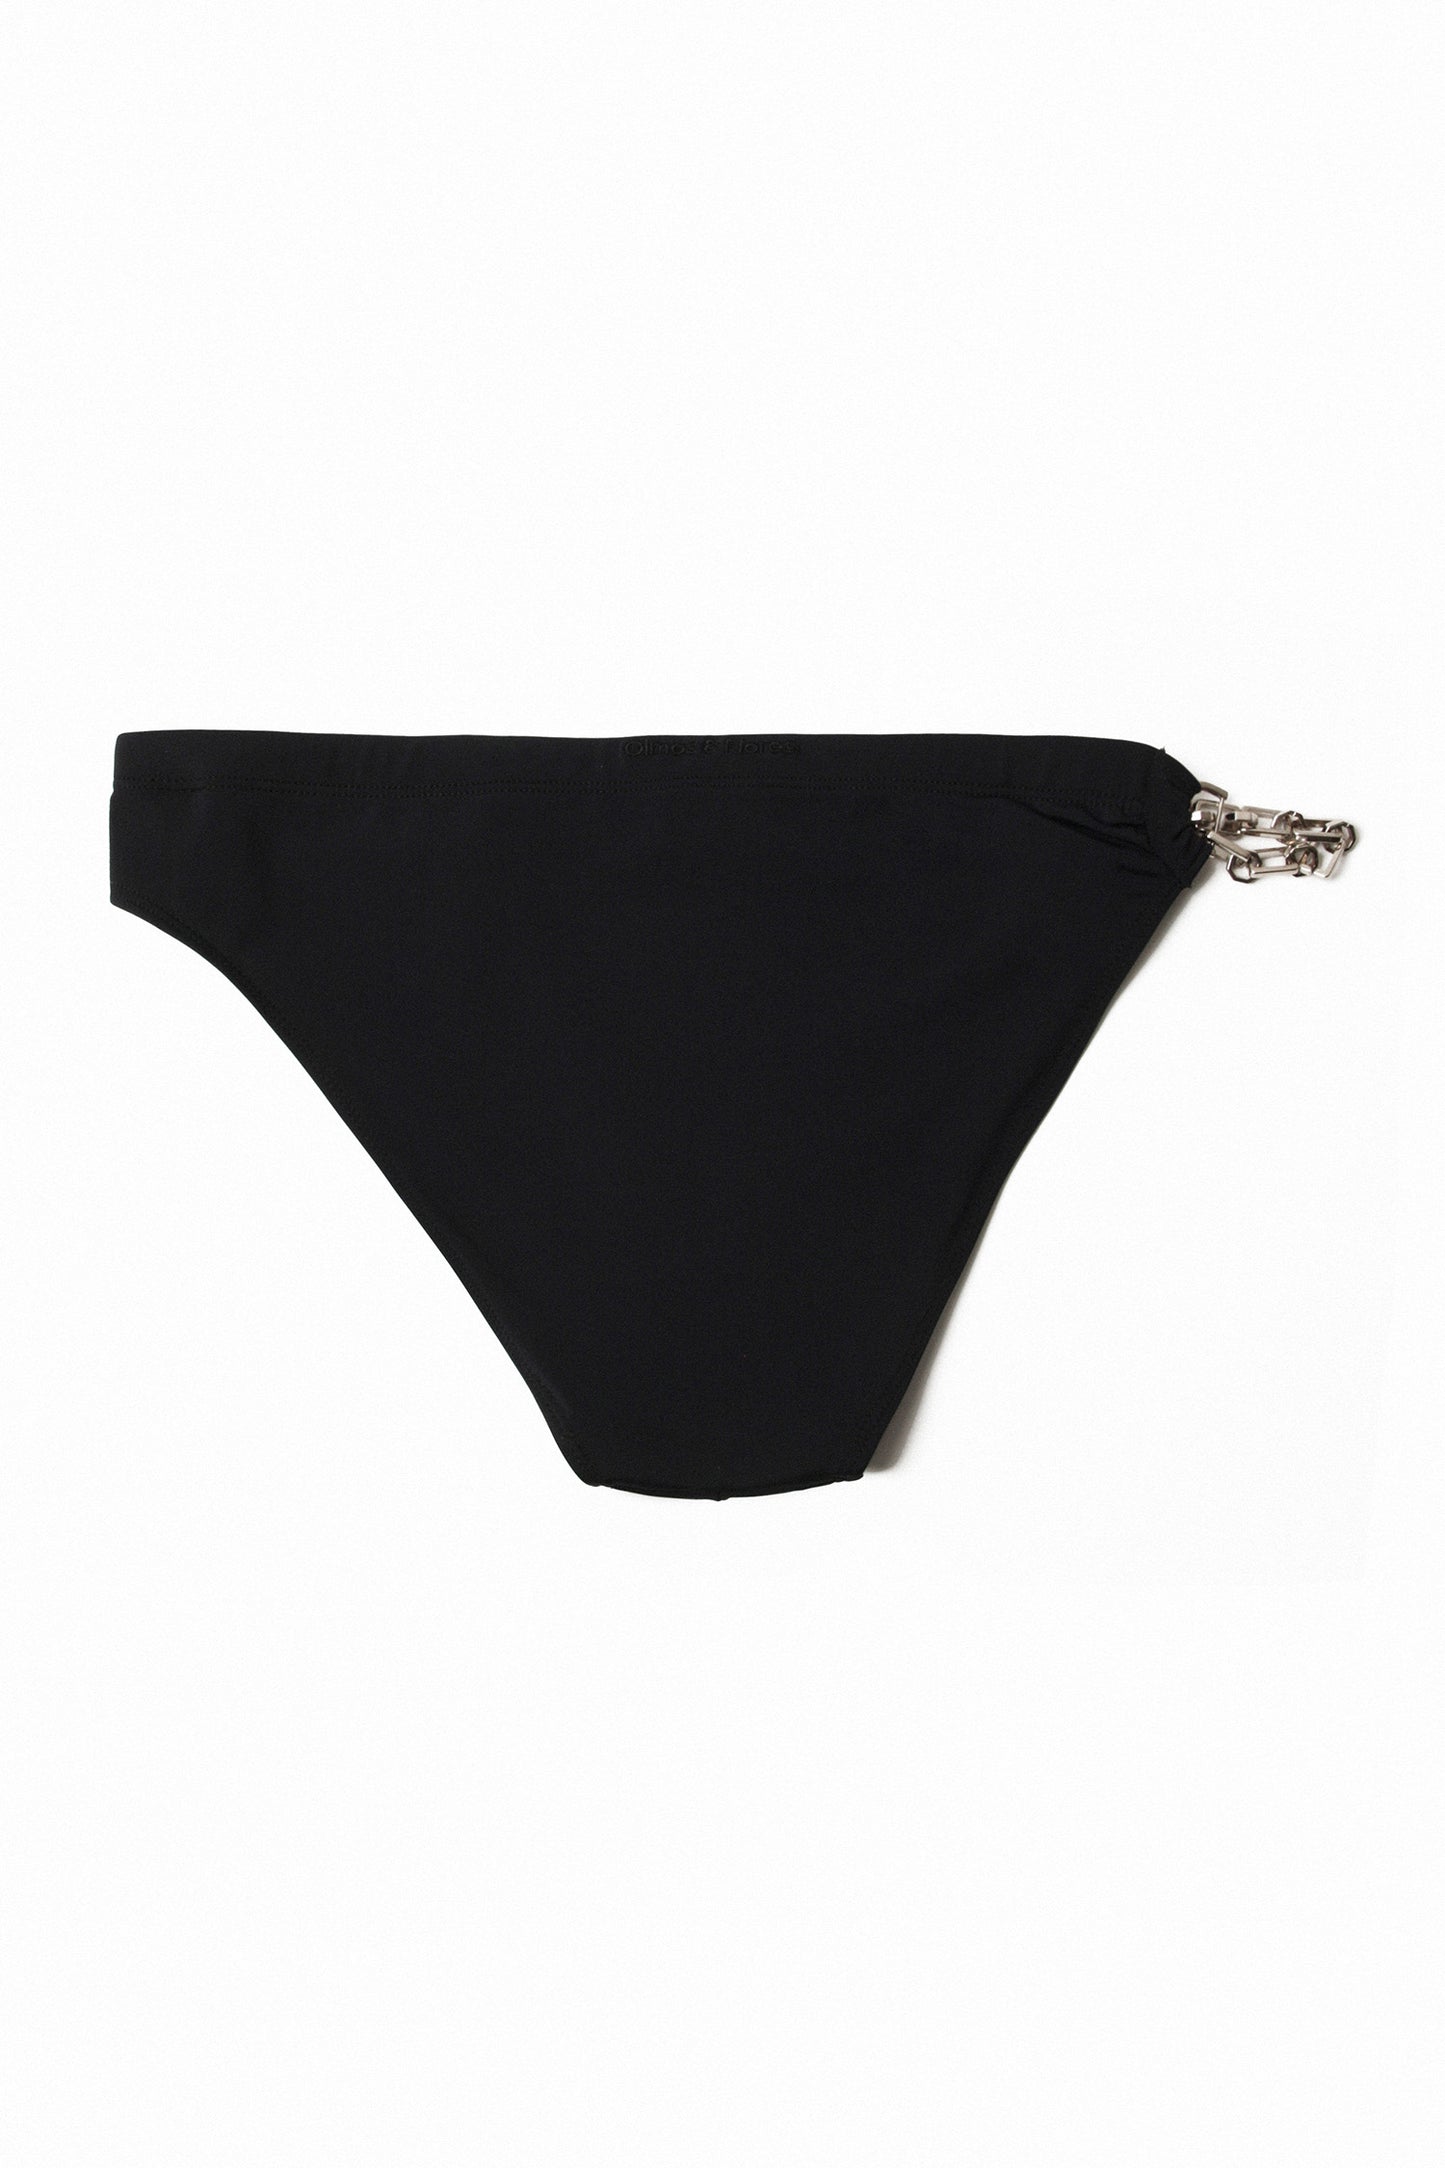 Anchor Brief Swimsuit